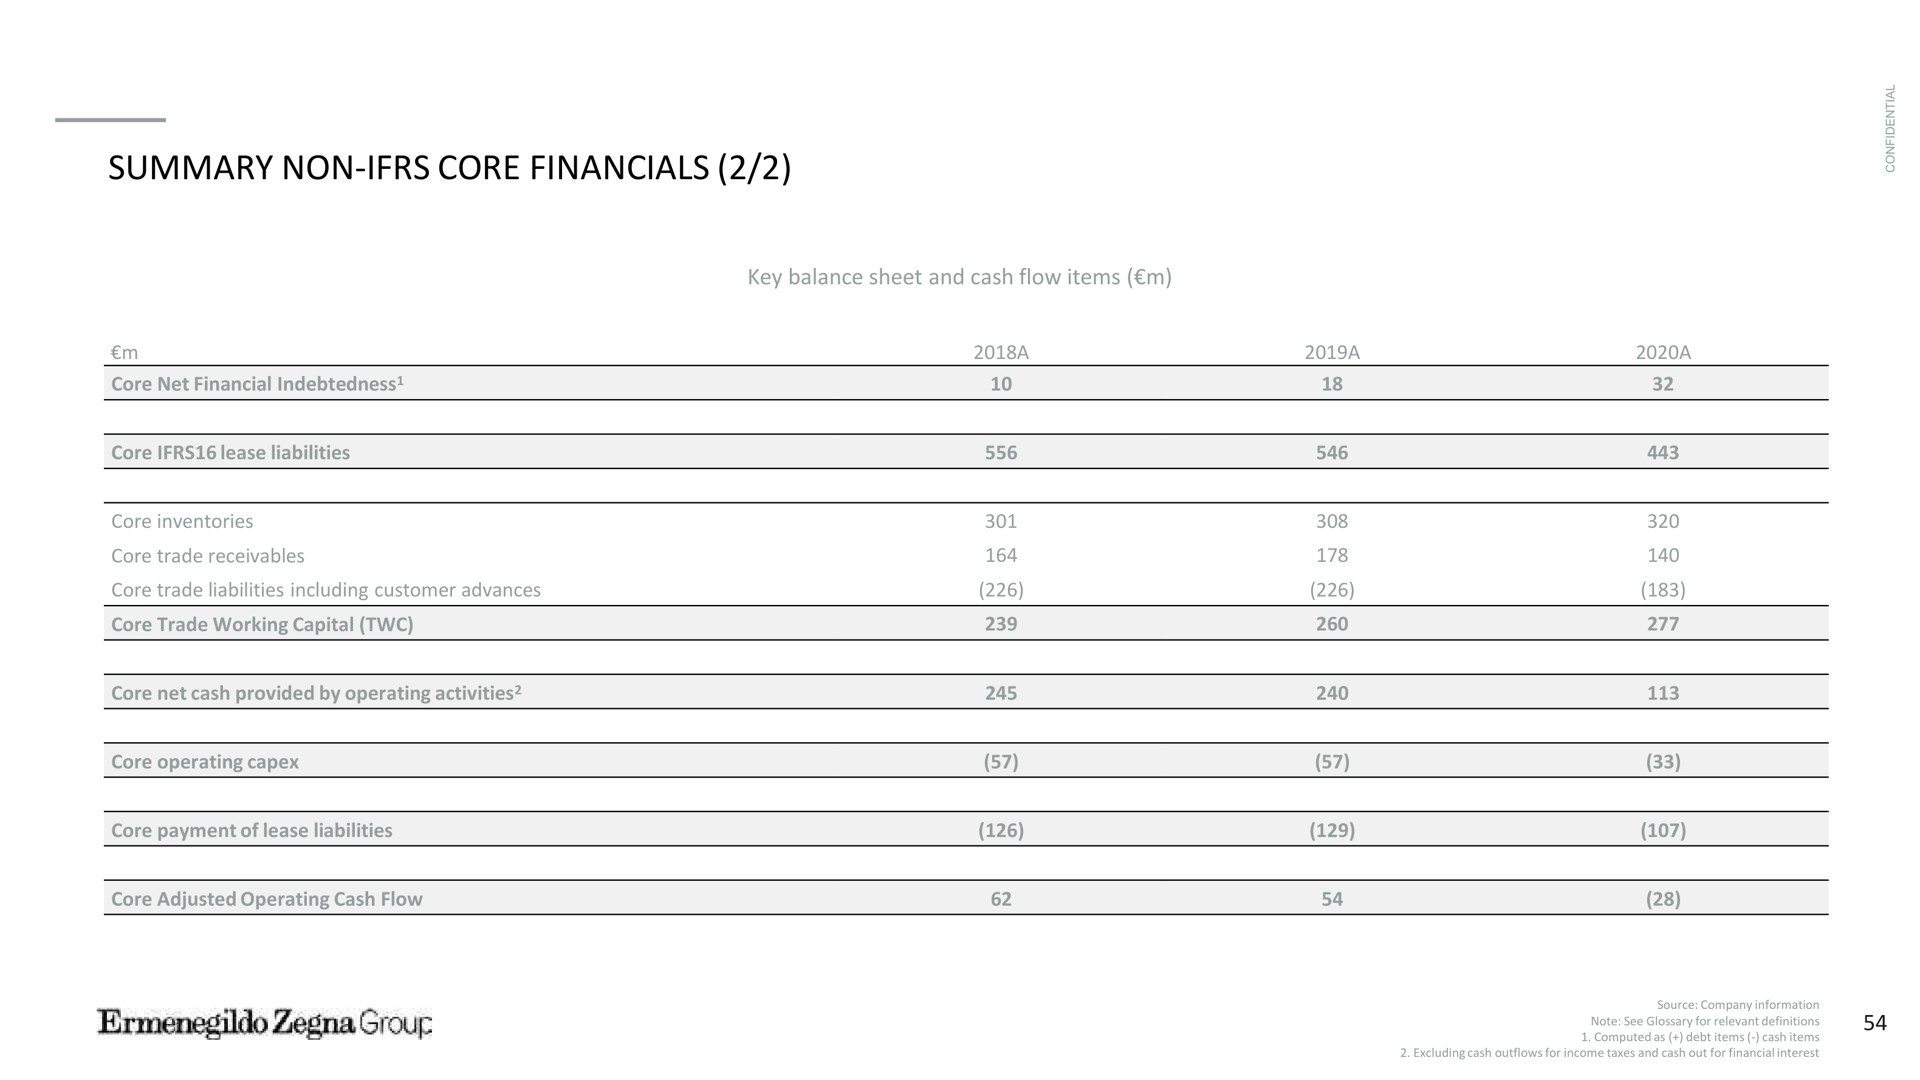 summary non core key balance sheet and cash flow items net financial indebtedness trade receivables trade liabilities including customer advances operating payment of lease liabilities adjusted operating cash flow | Zegna